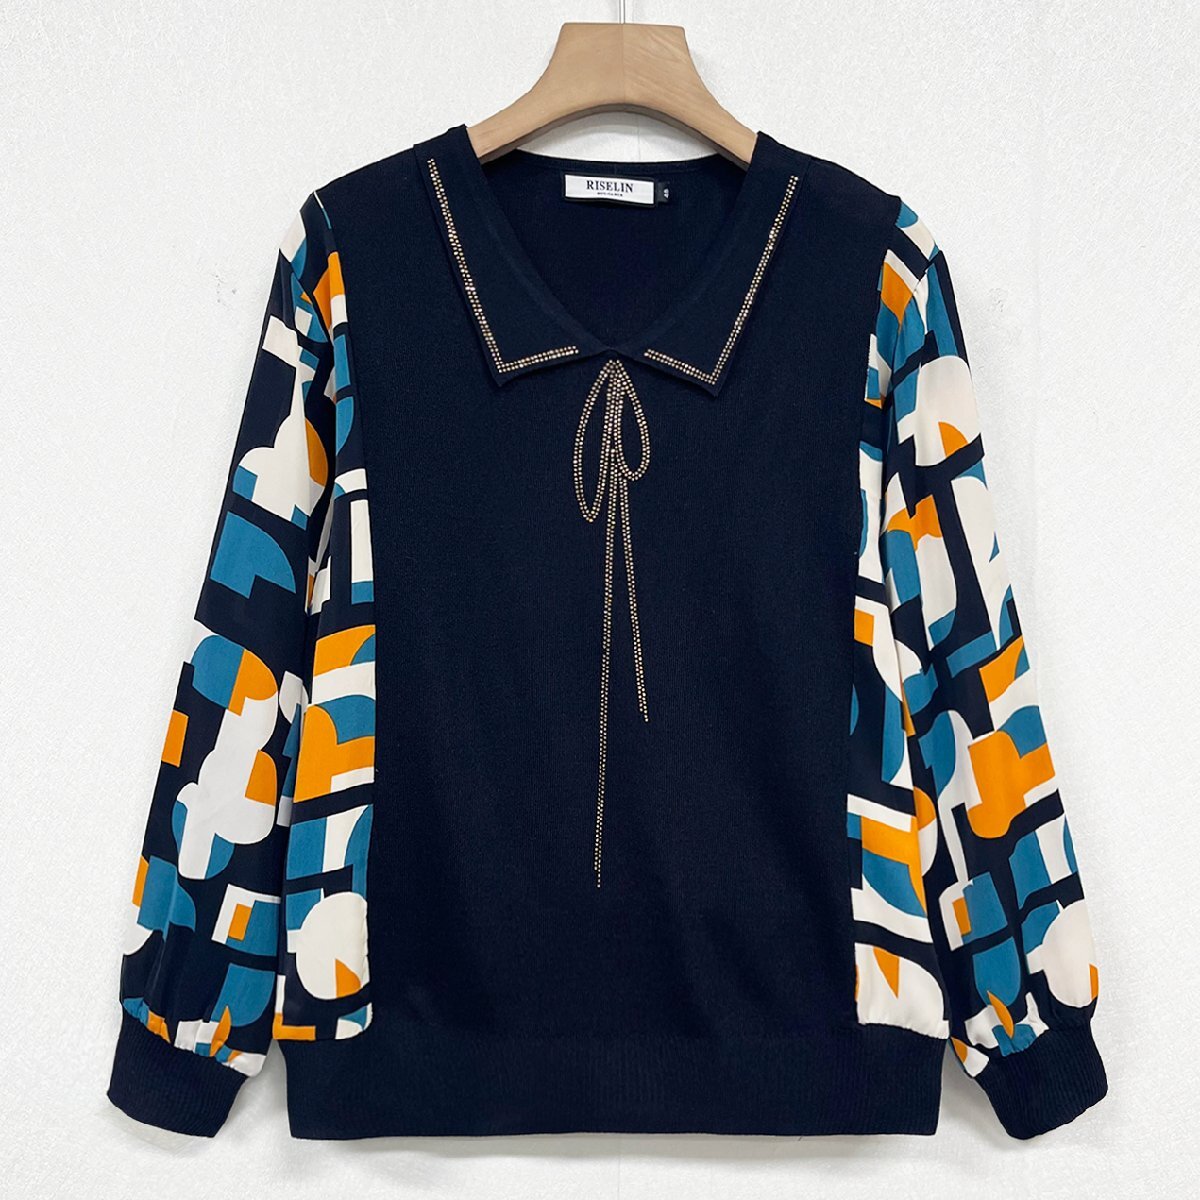  new work Europe made * regular price 4 ten thousand * BVLGARY a departure *RISELIN sweatshirt ventilation thin knitted unusual material switch . what . pattern commuting tops lady's spring summer L